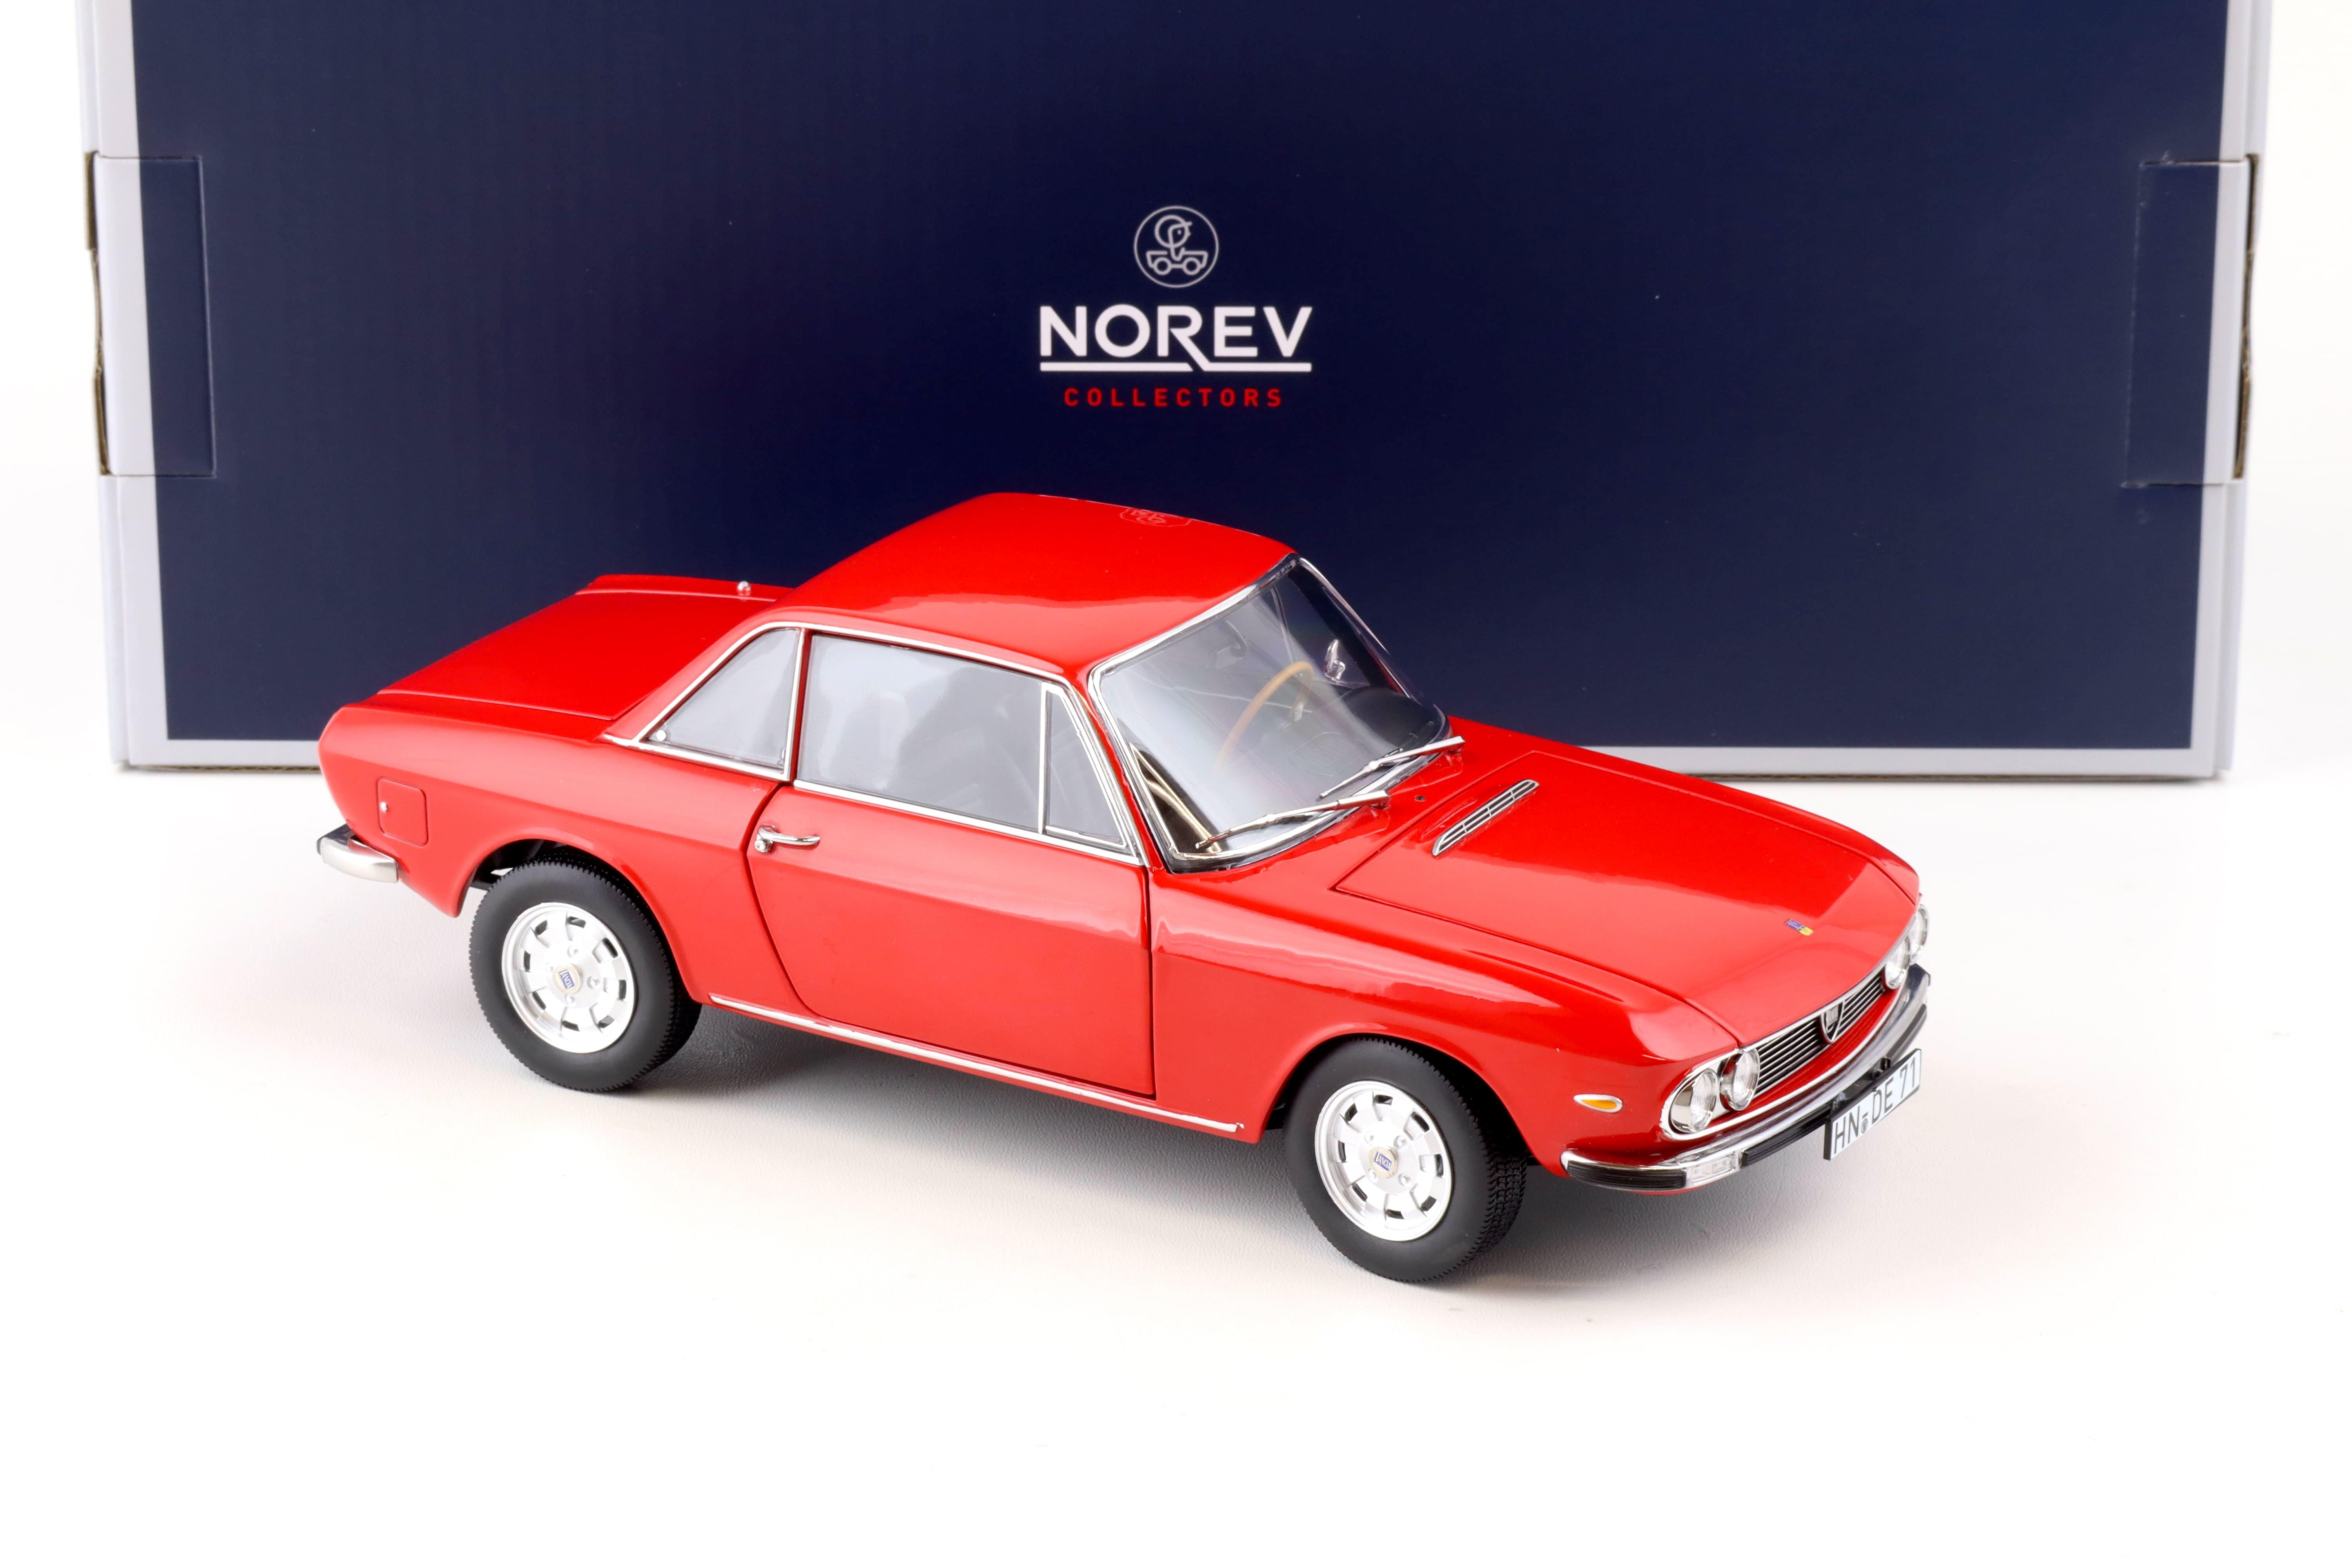 1:18 Norev Lancia Fulvia 1600 HF Lusso 1971 red - Limited Edition 1000 pcs.